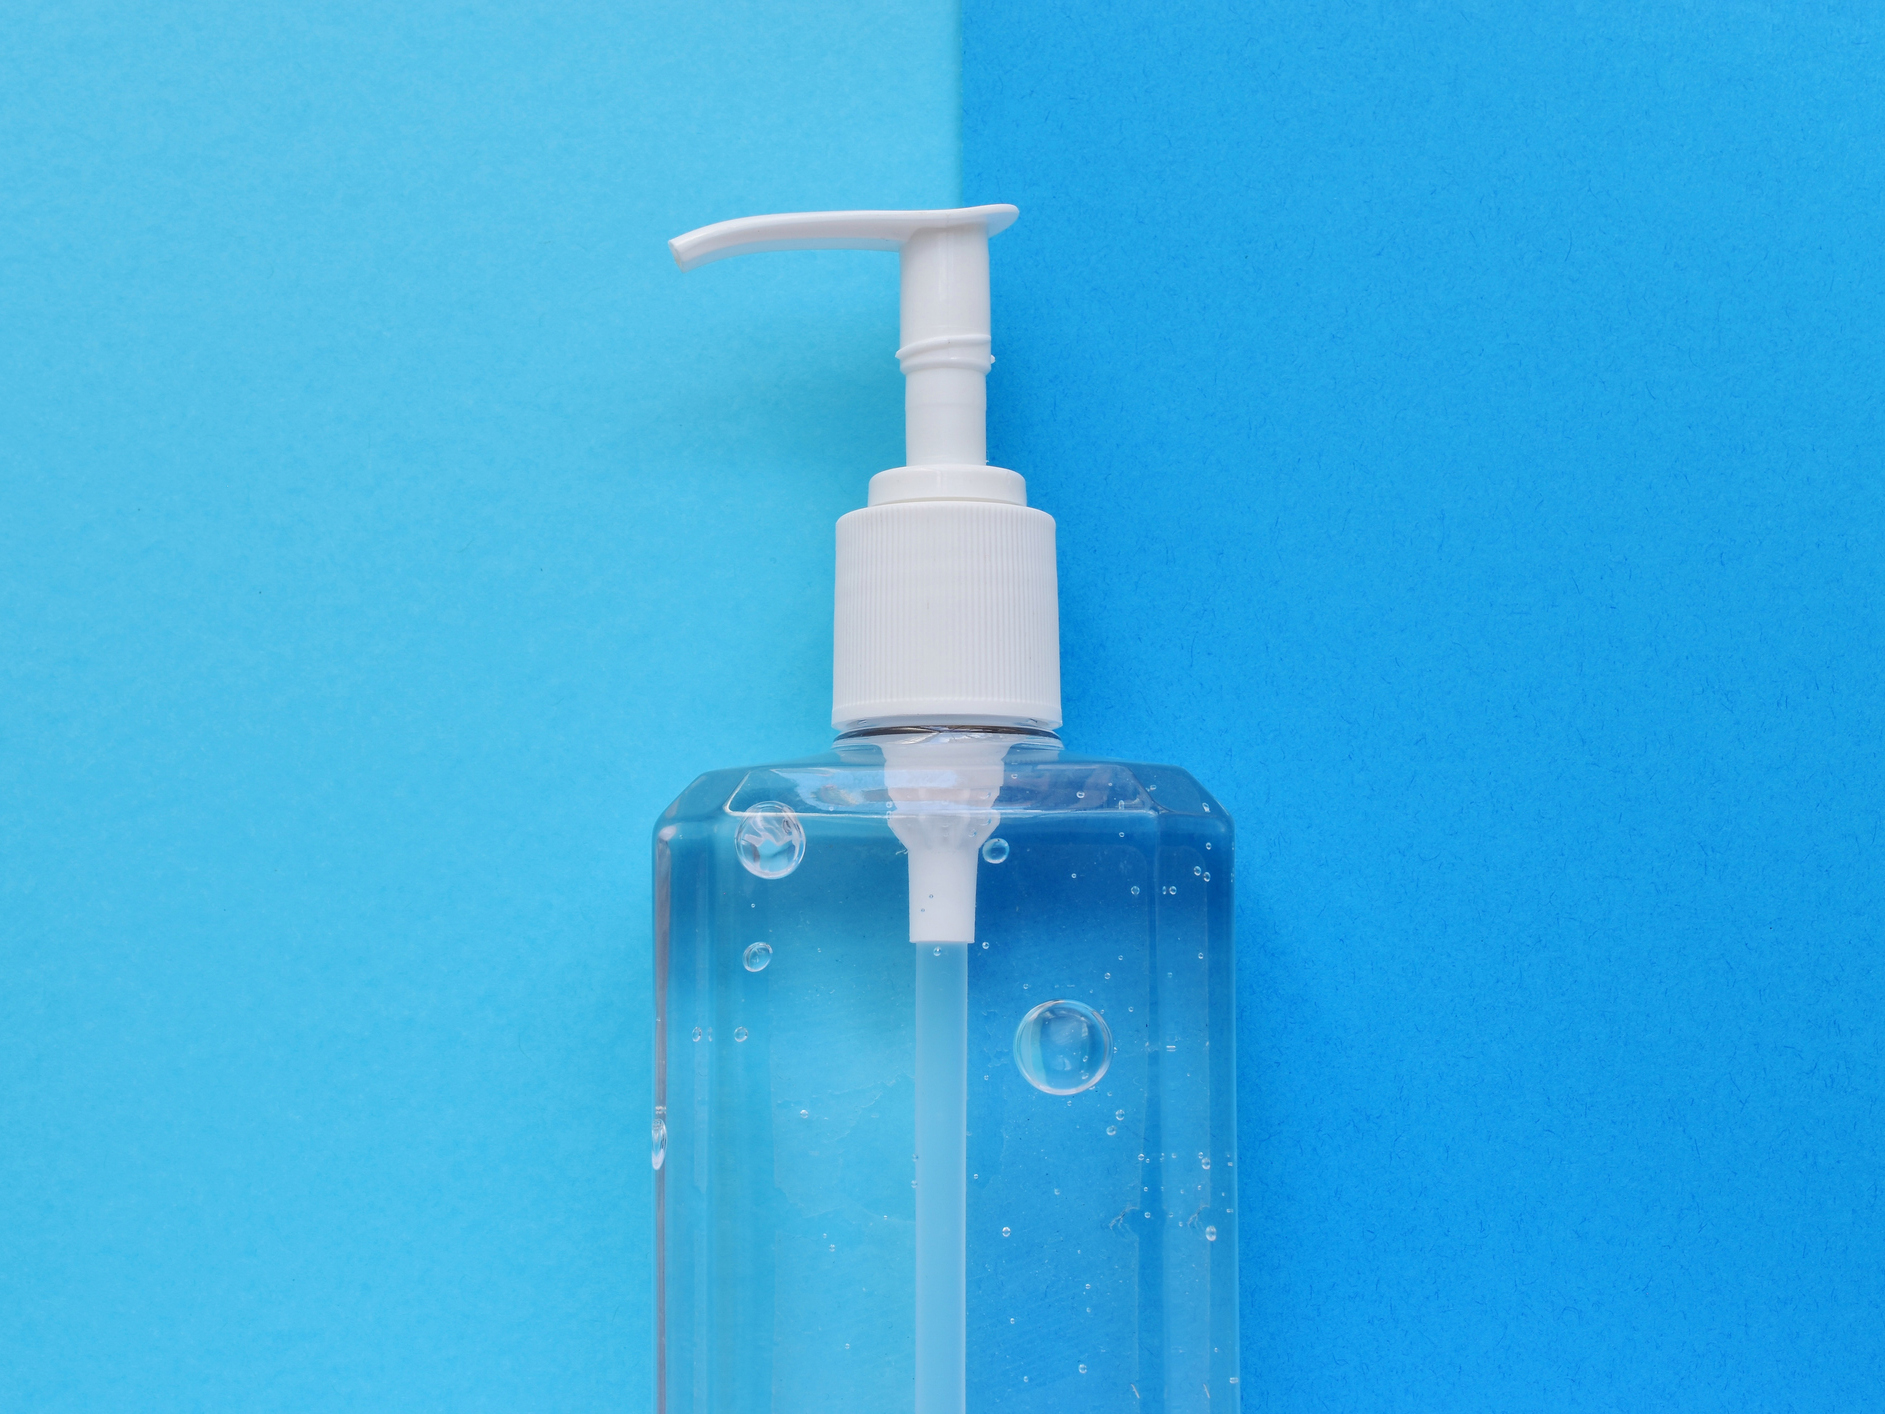 How to make homemade hand sanitizer that actually works